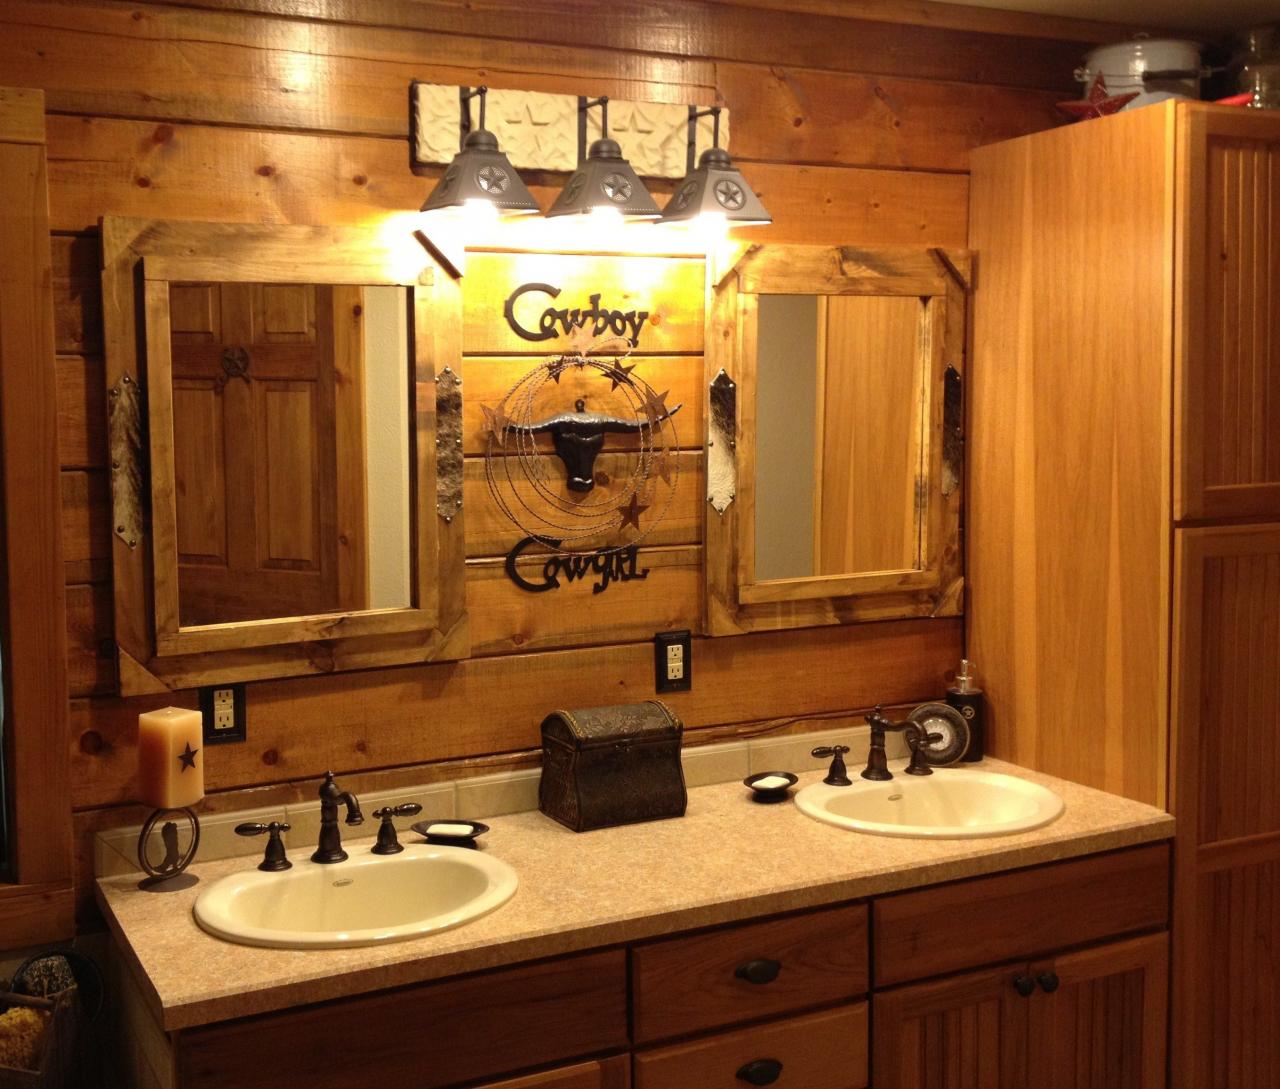 My new bathroom mirrors. Bought in Canton this weekend. Western